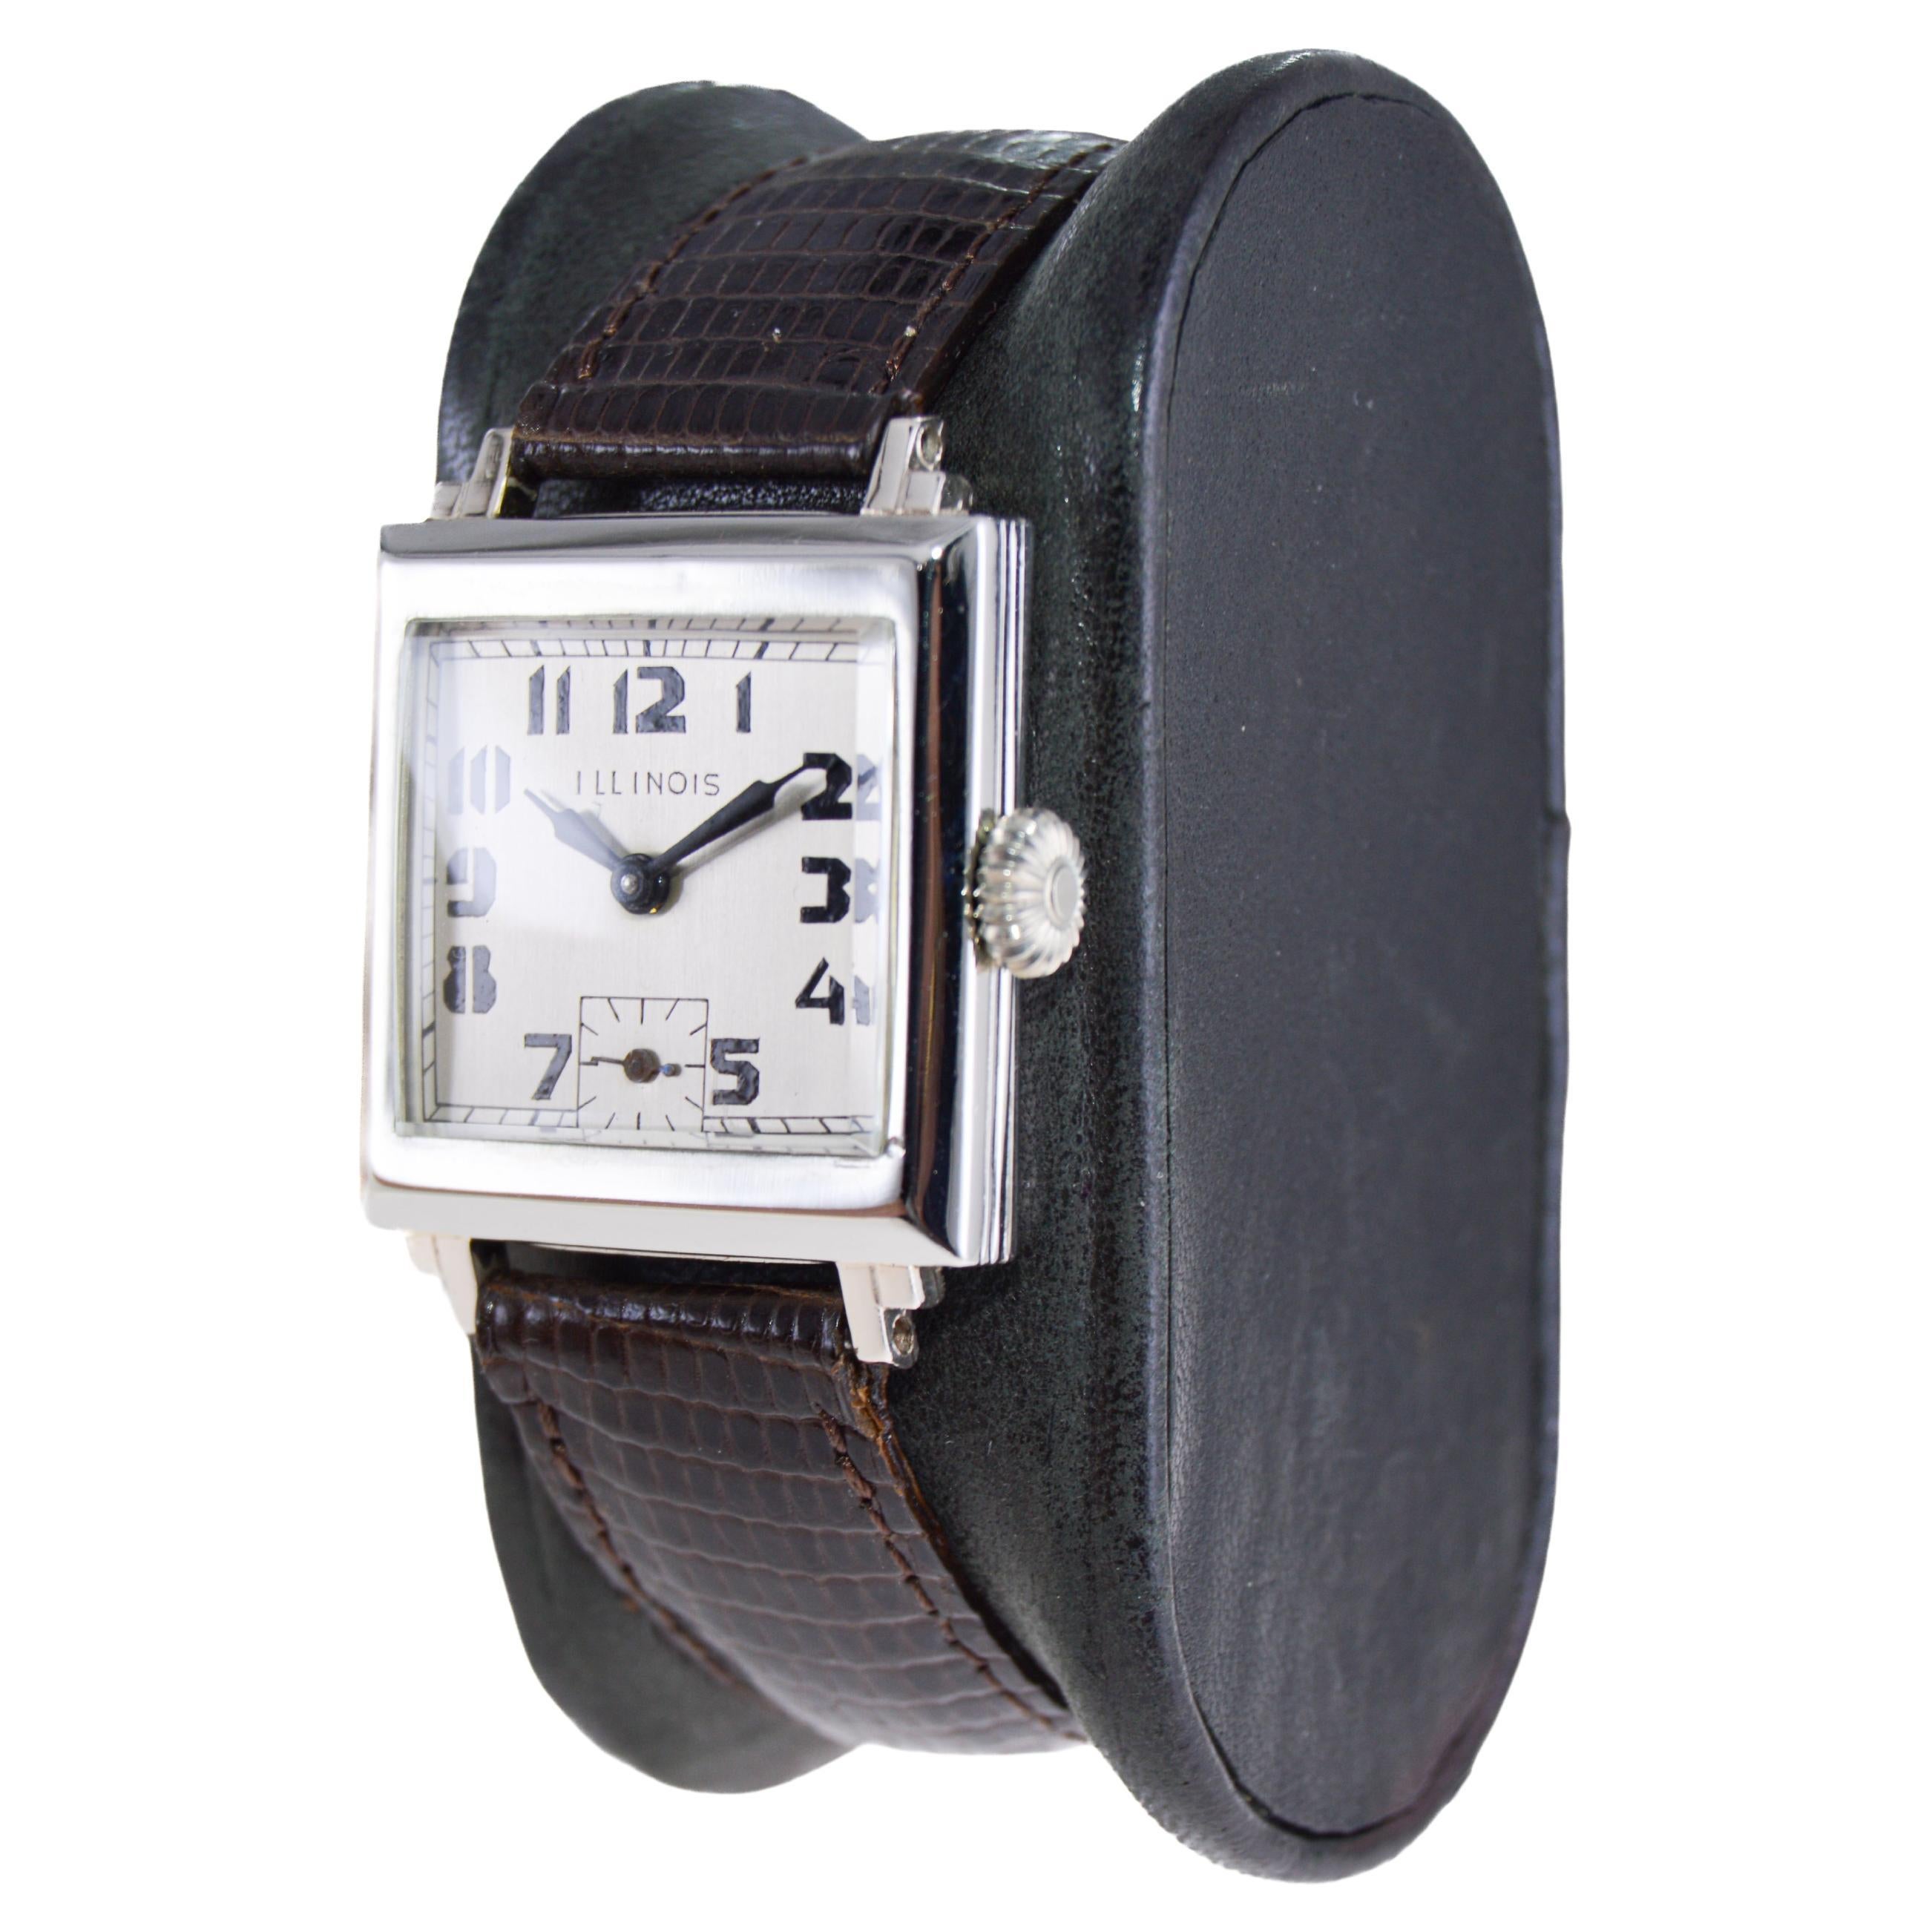 Illinois White Gold Filled Watch Art Deco Wrist Watch 1930's In Excellent Condition For Sale In Long Beach, CA